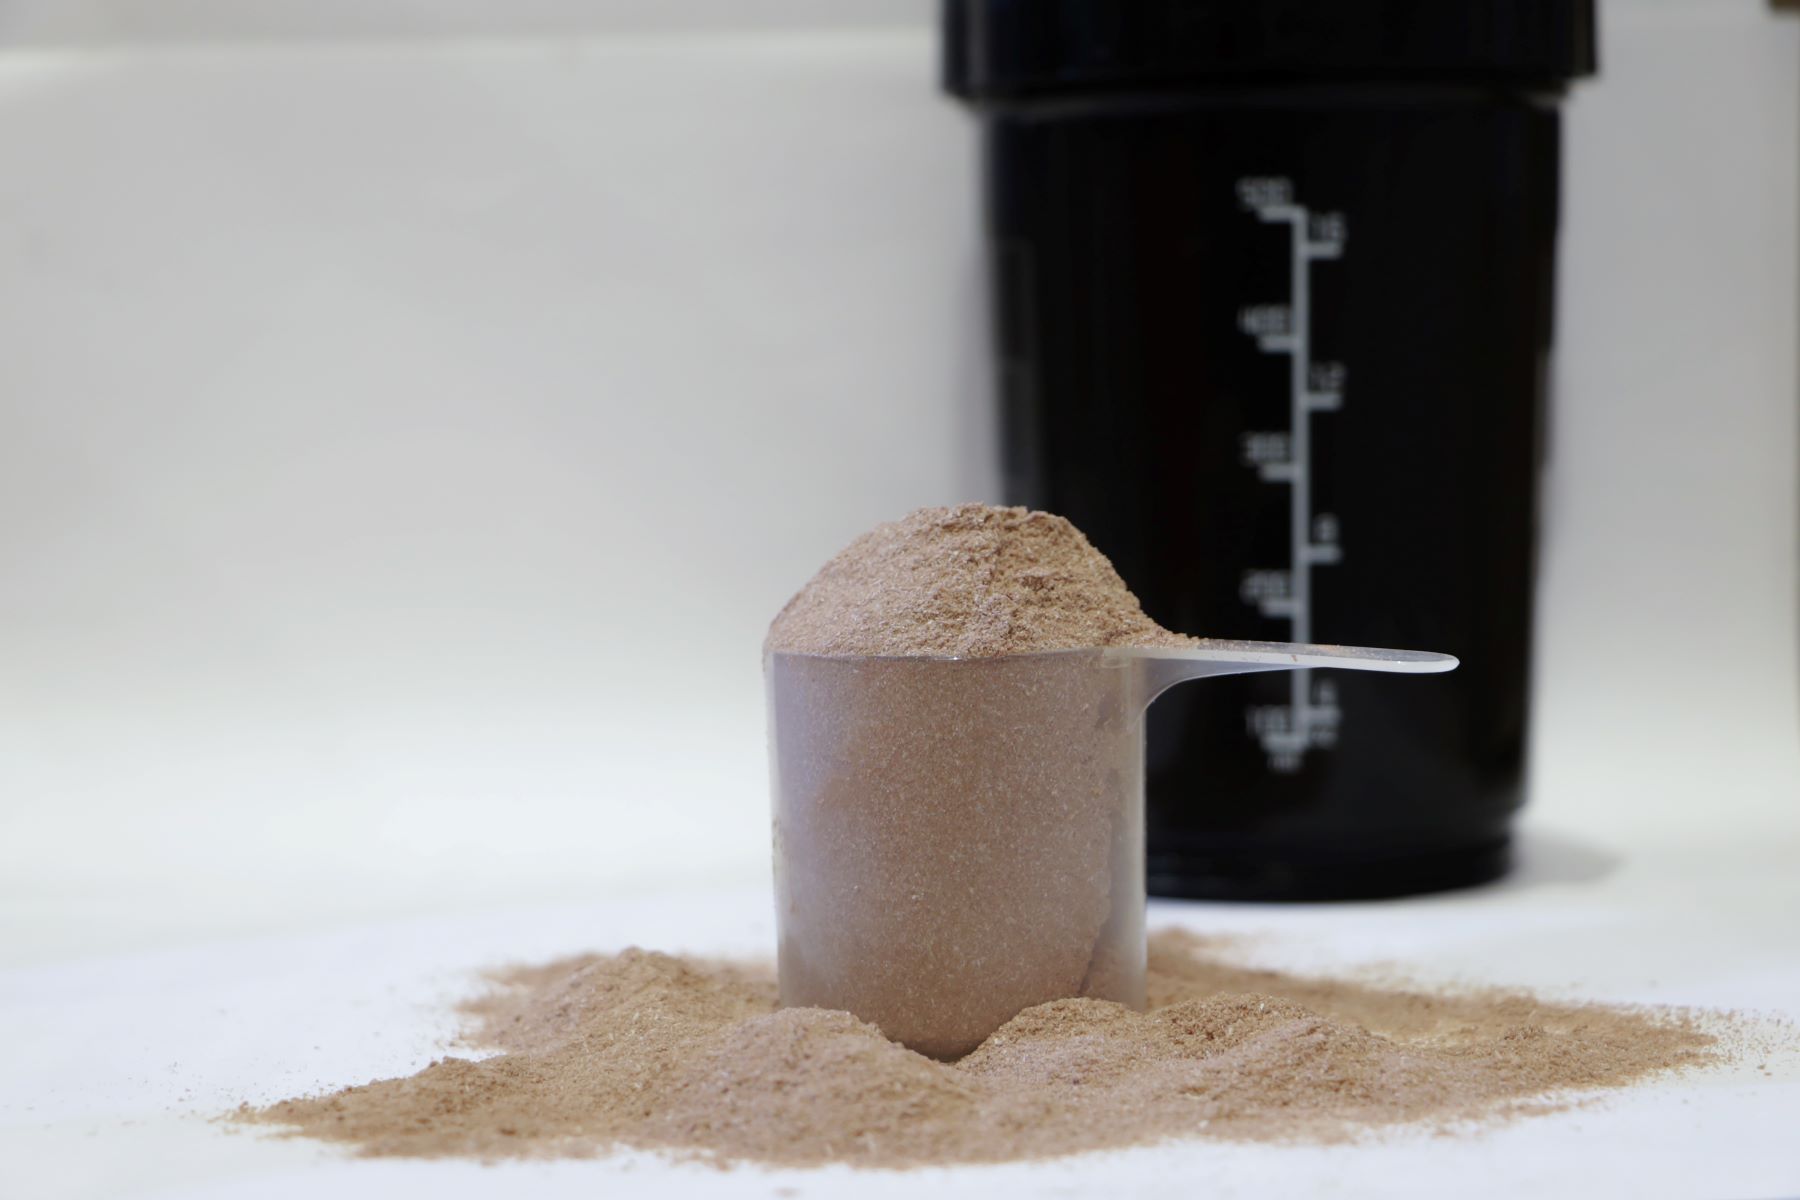 Dry Scooping Creatine: The Surprising New Trend You Need To Try!